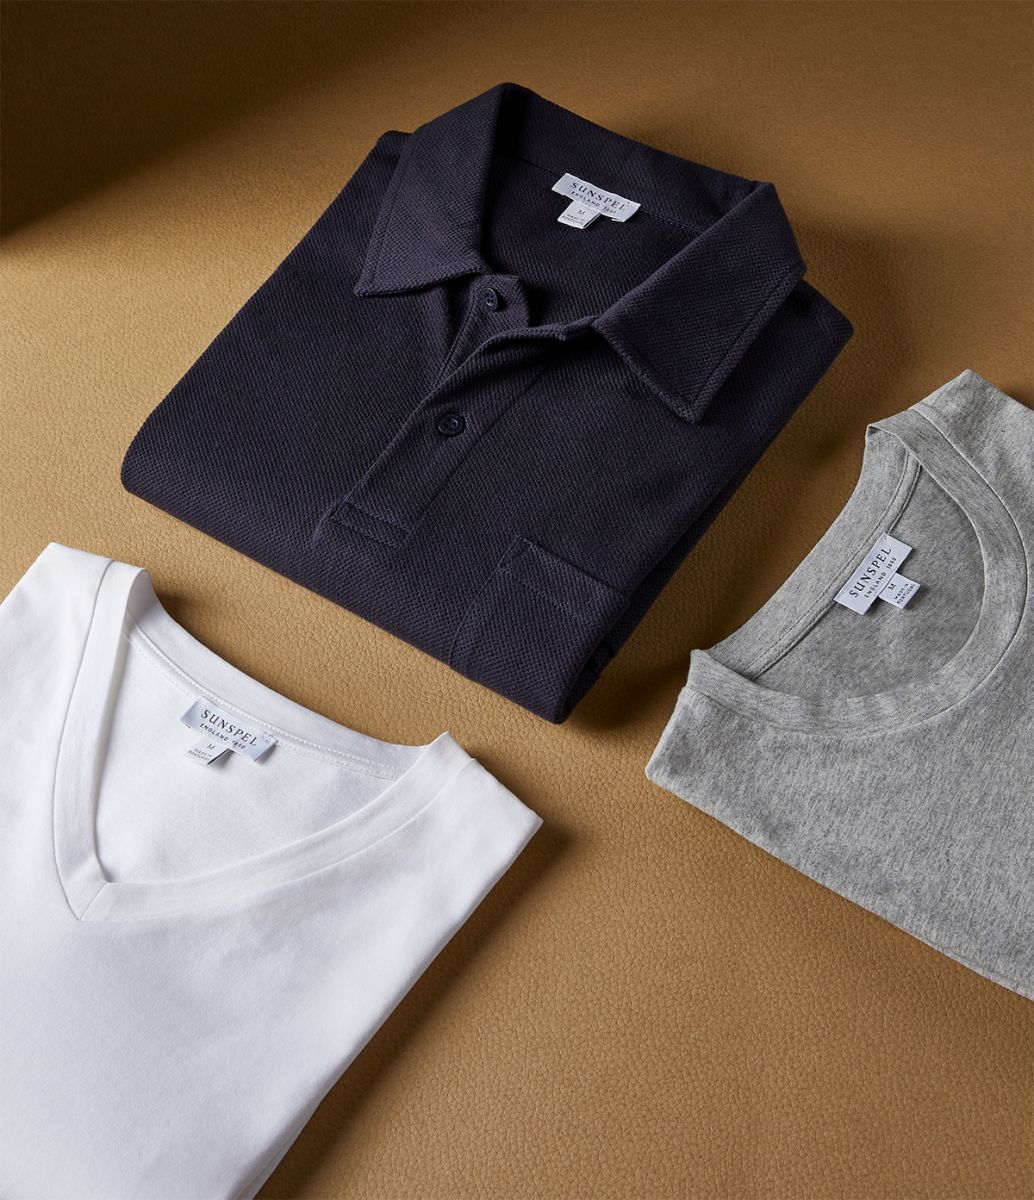 Sunspel Riviera Polo and shirts